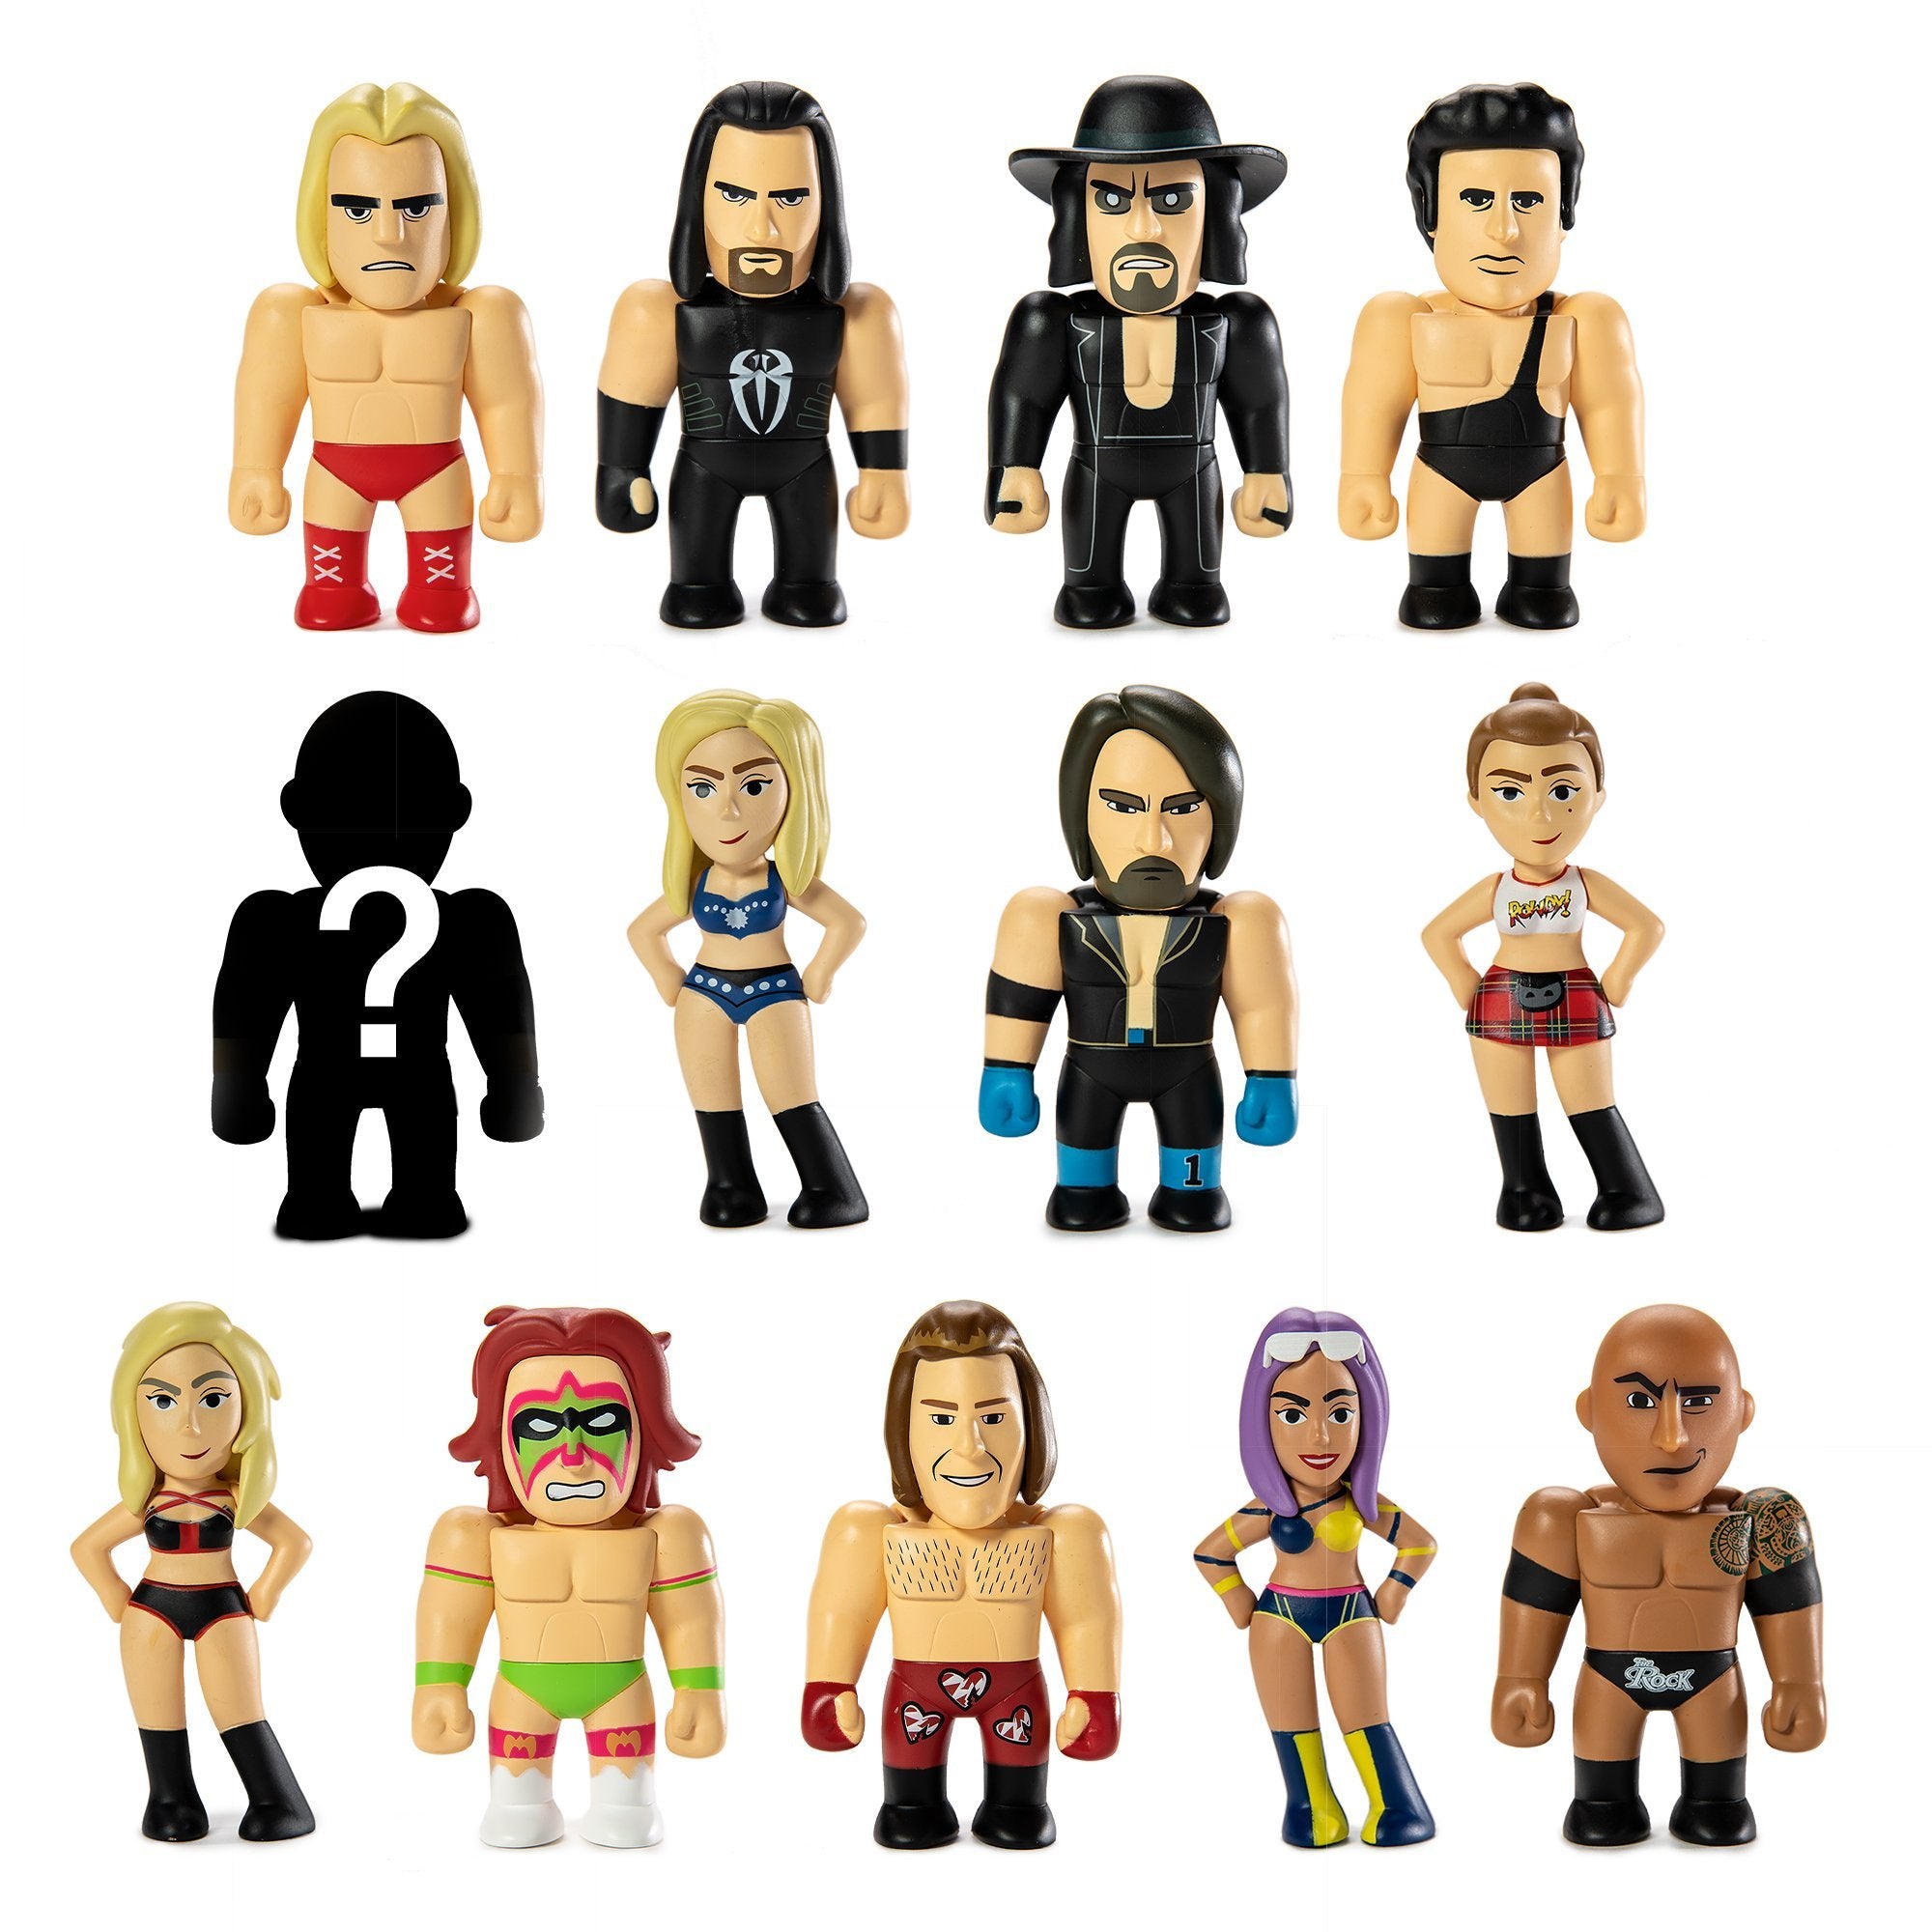 small collectible figures